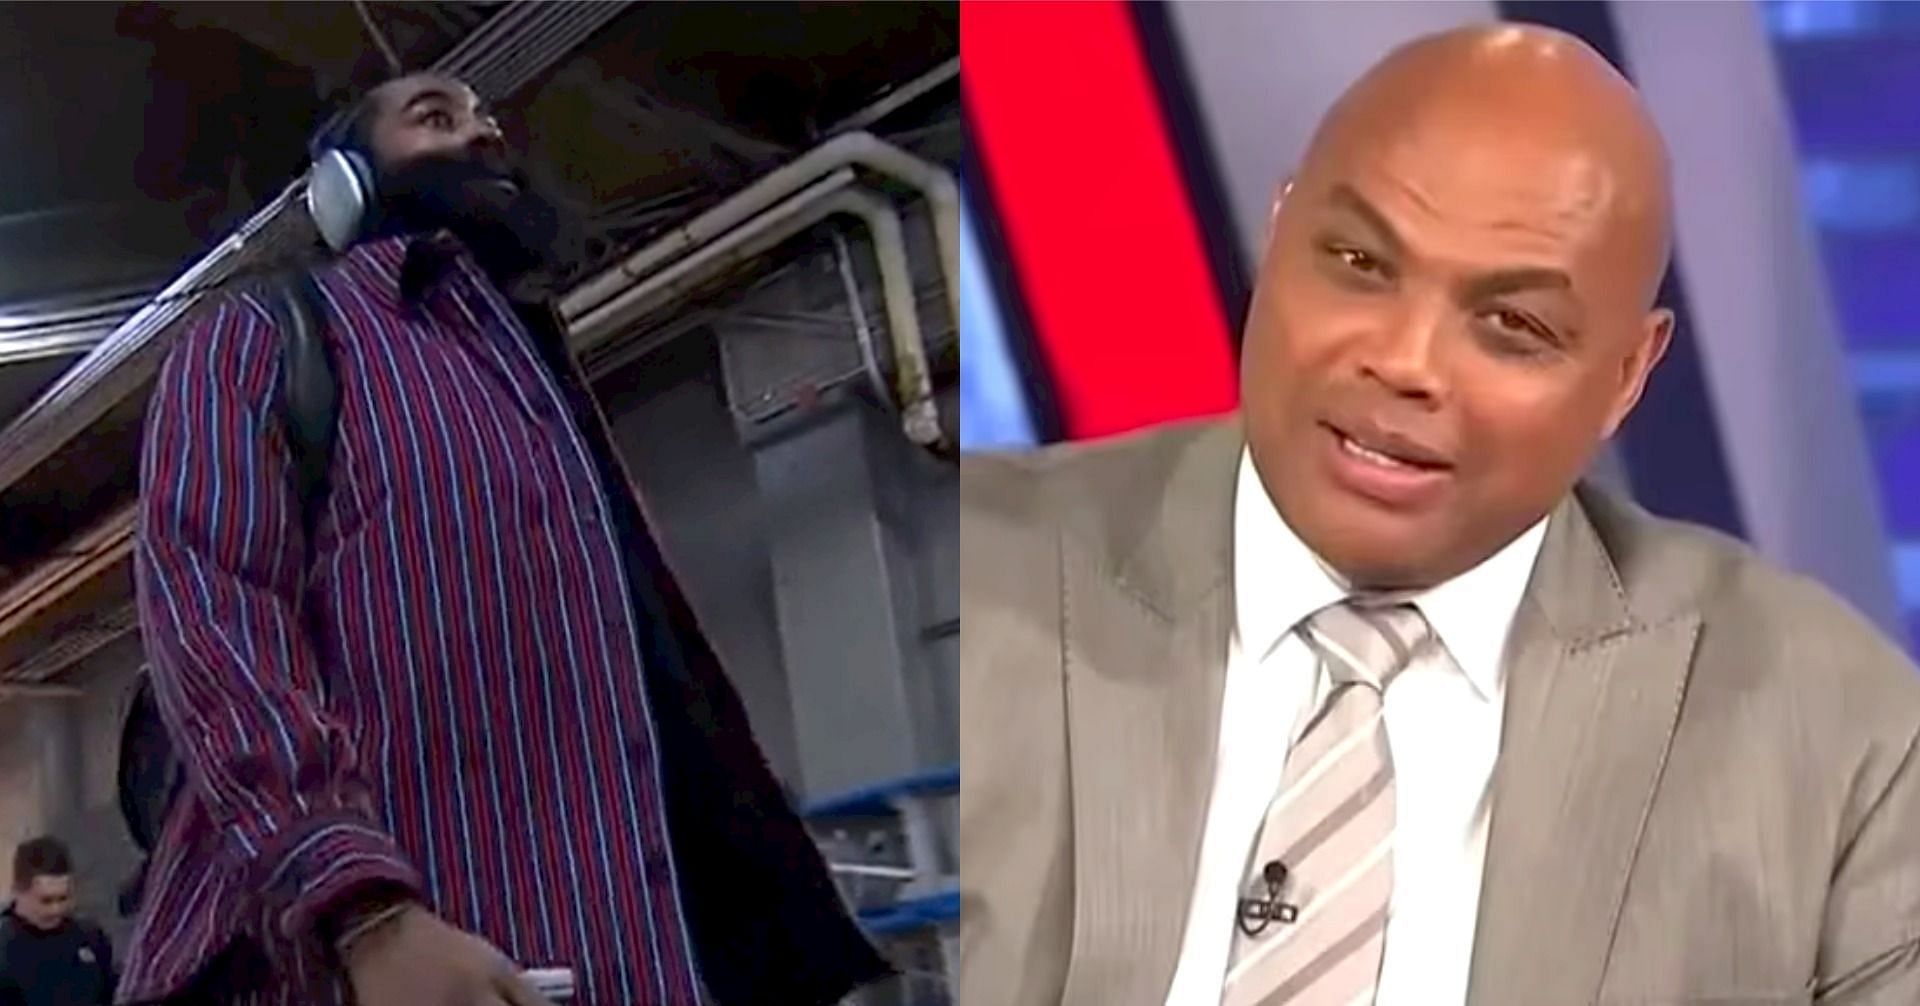 LA Clippers star guard James Harden and NBA legend-turned-TNT analyst Charles Barkley